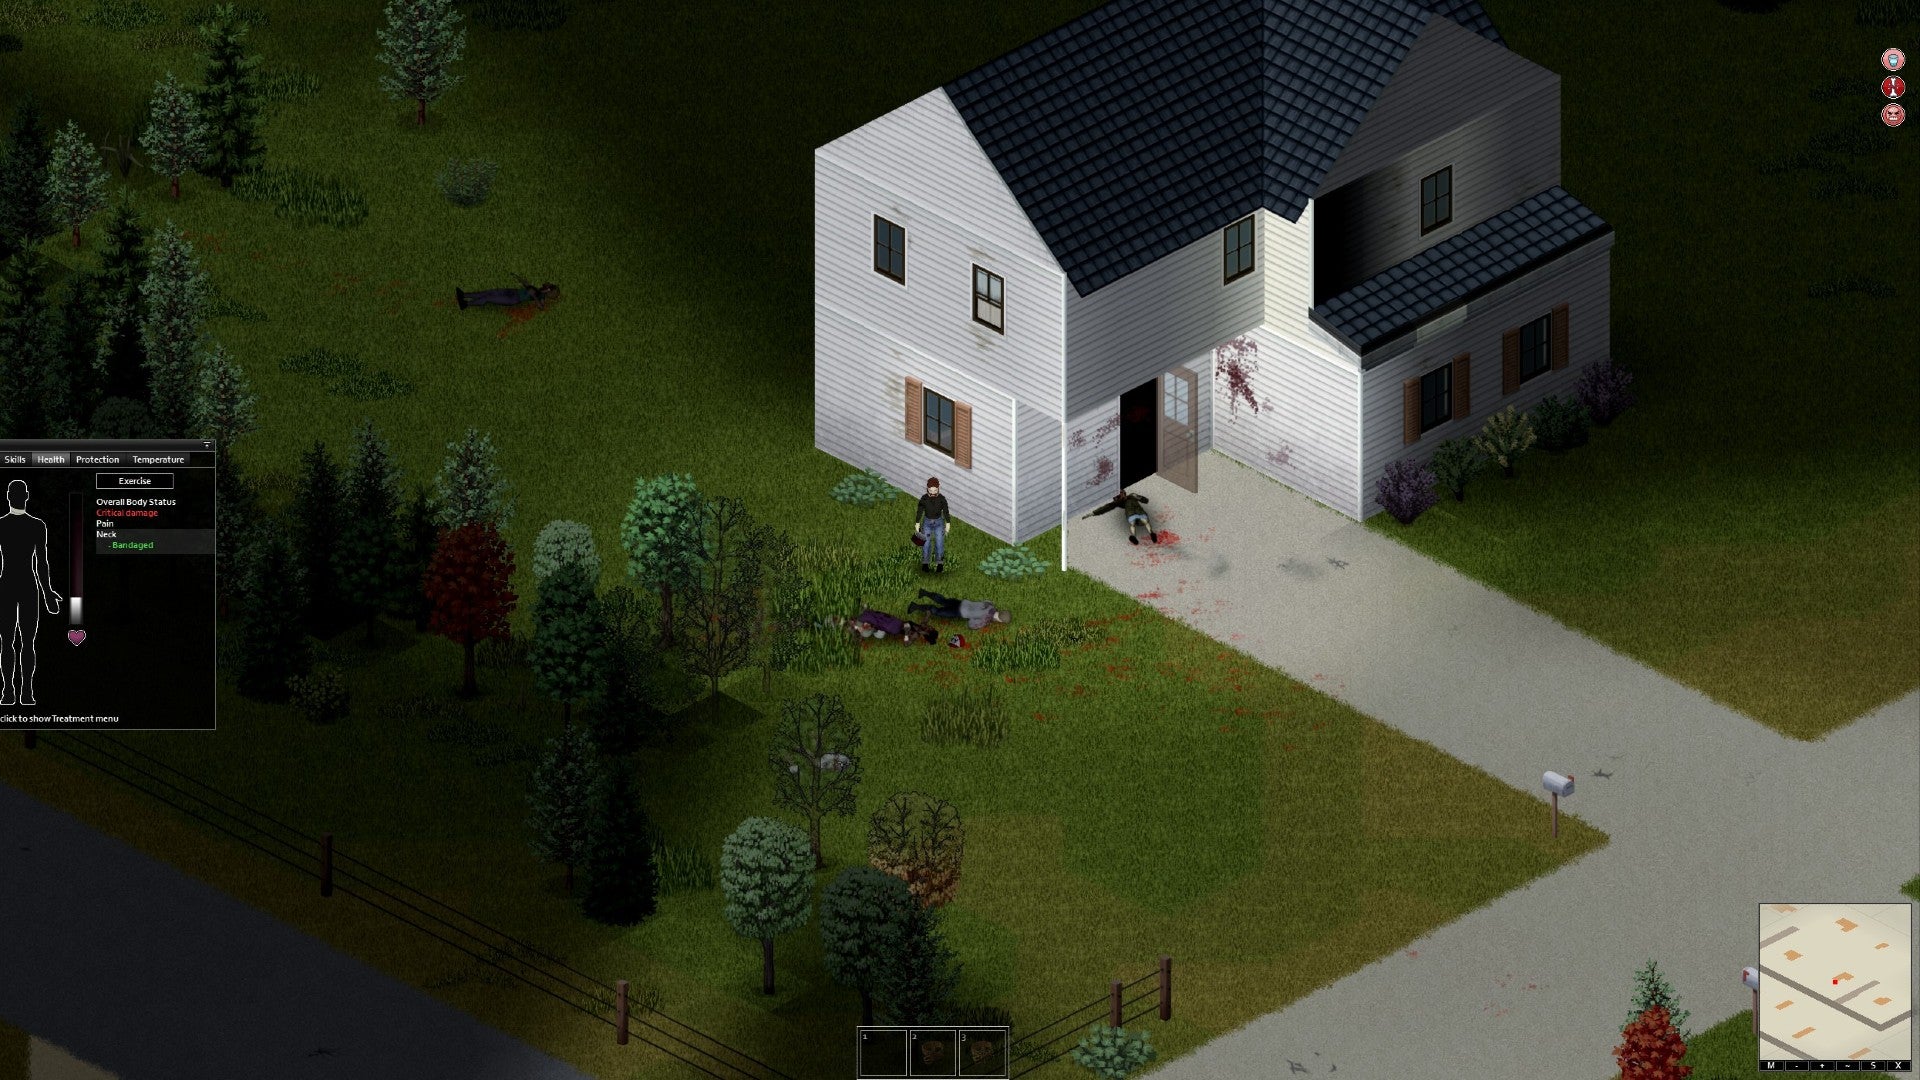 Project Zomboid player surrounded by zombie corpses. Player's leg is fractured after jumping out of a high window to escape a horde